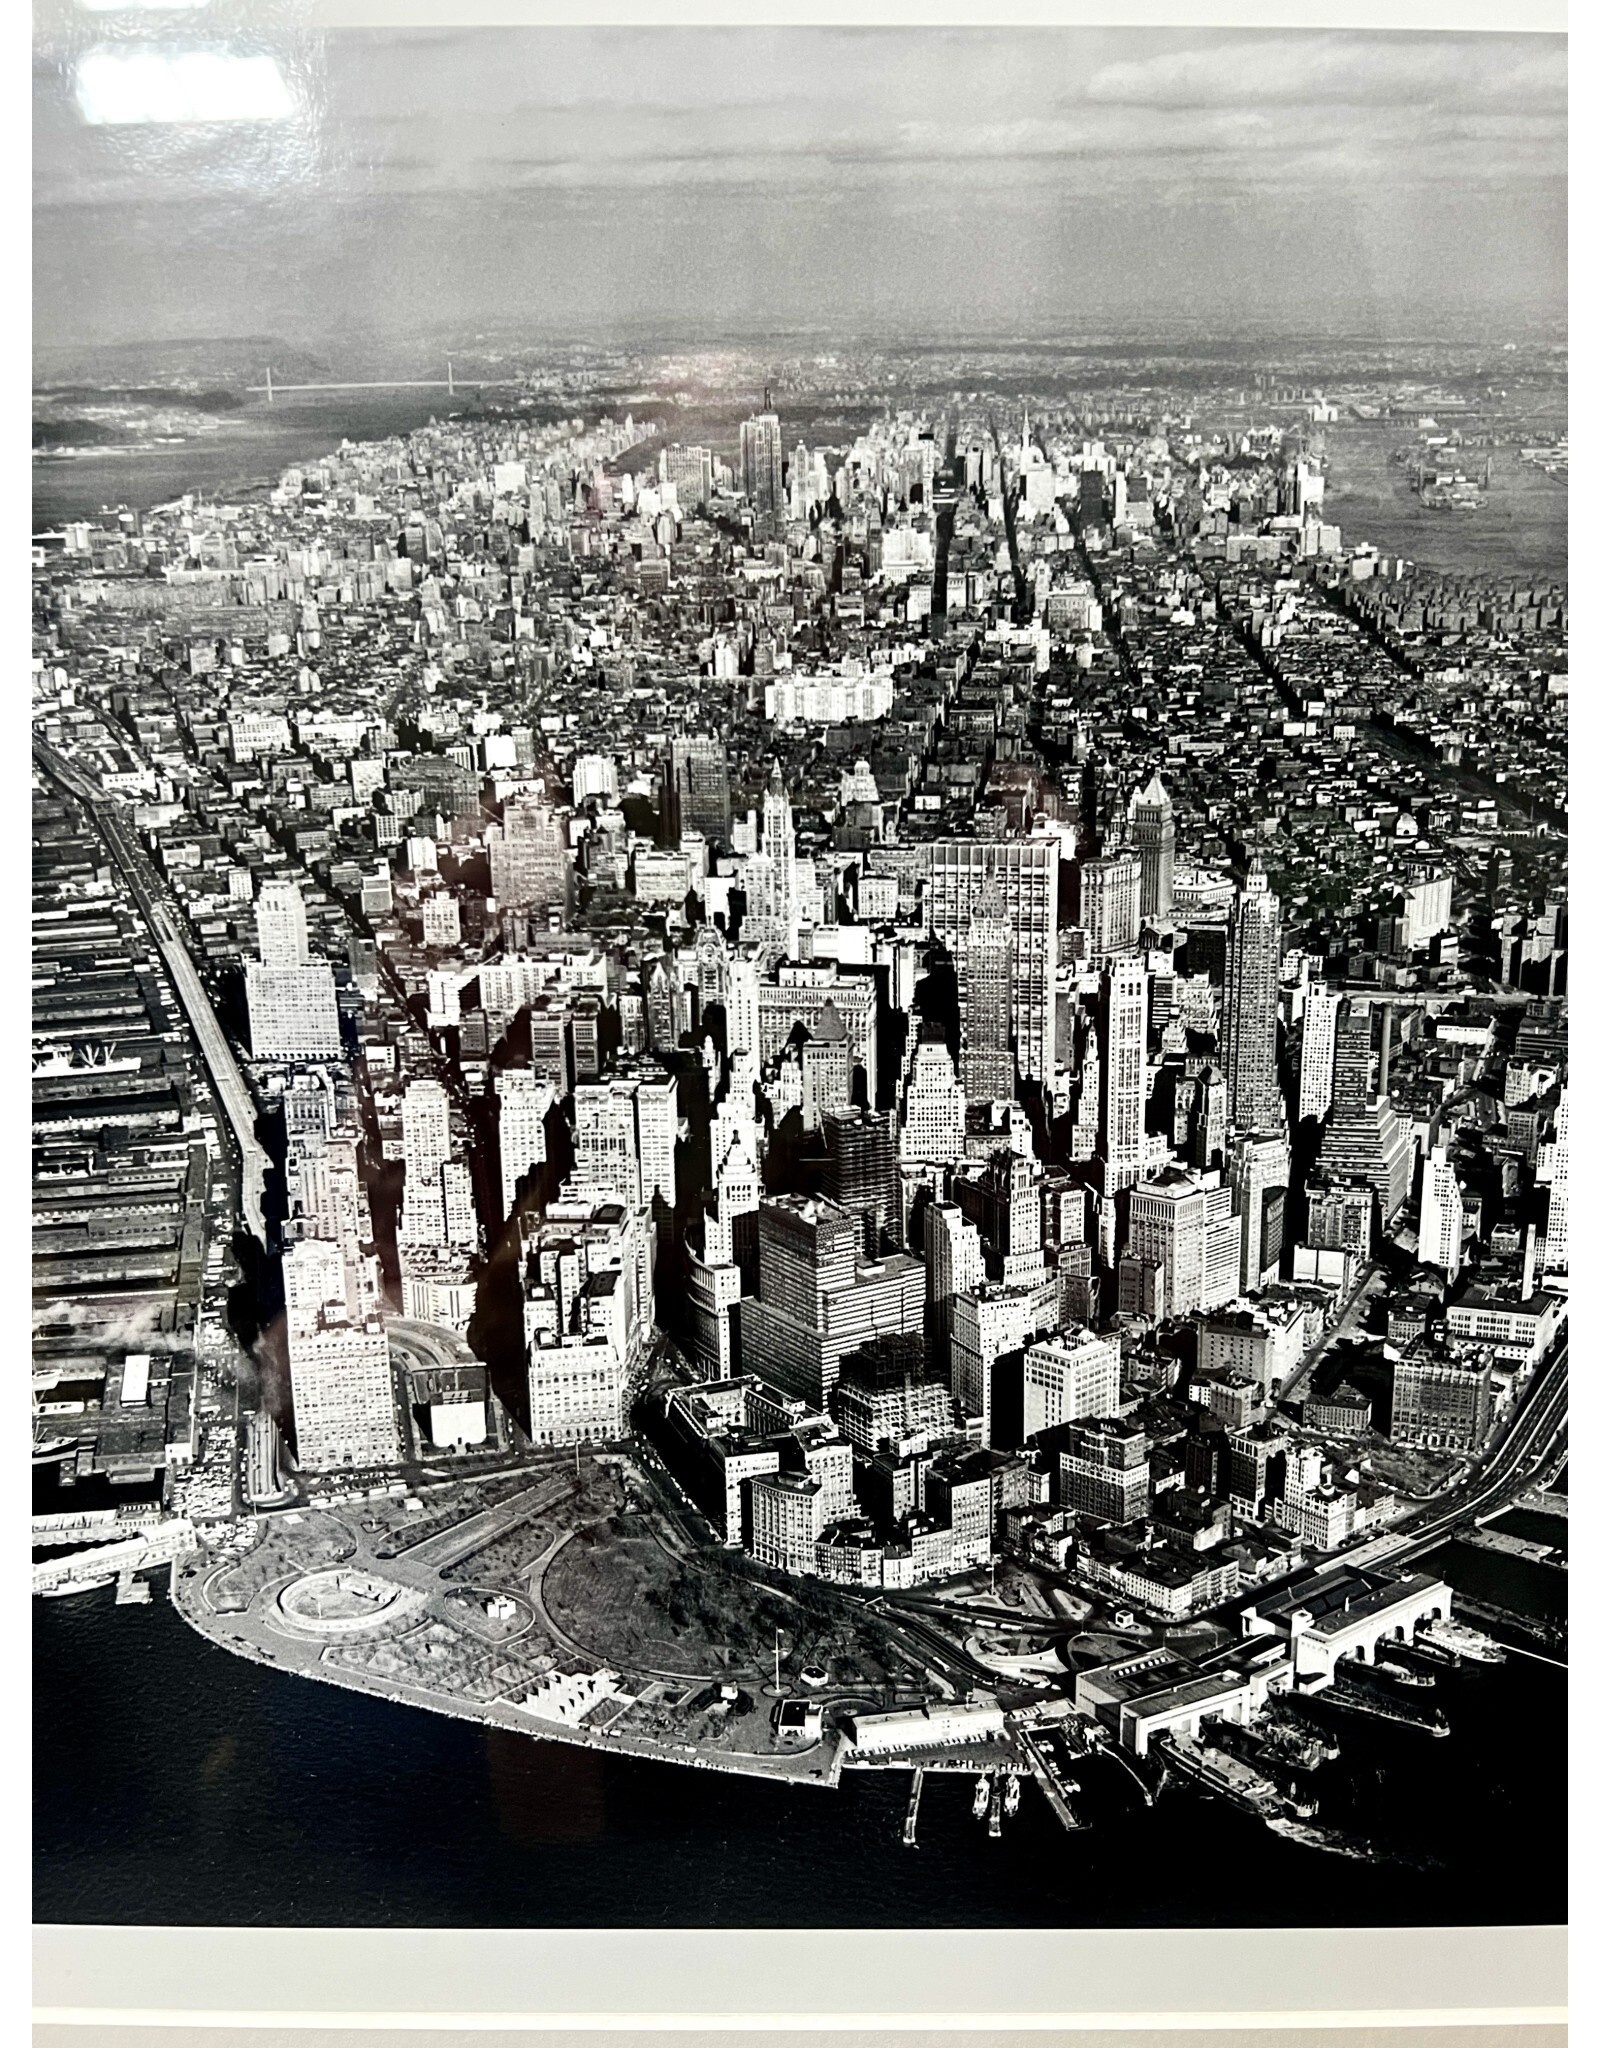 Arial View of Manhattan-1930, by Philip Gendreau, 74/295